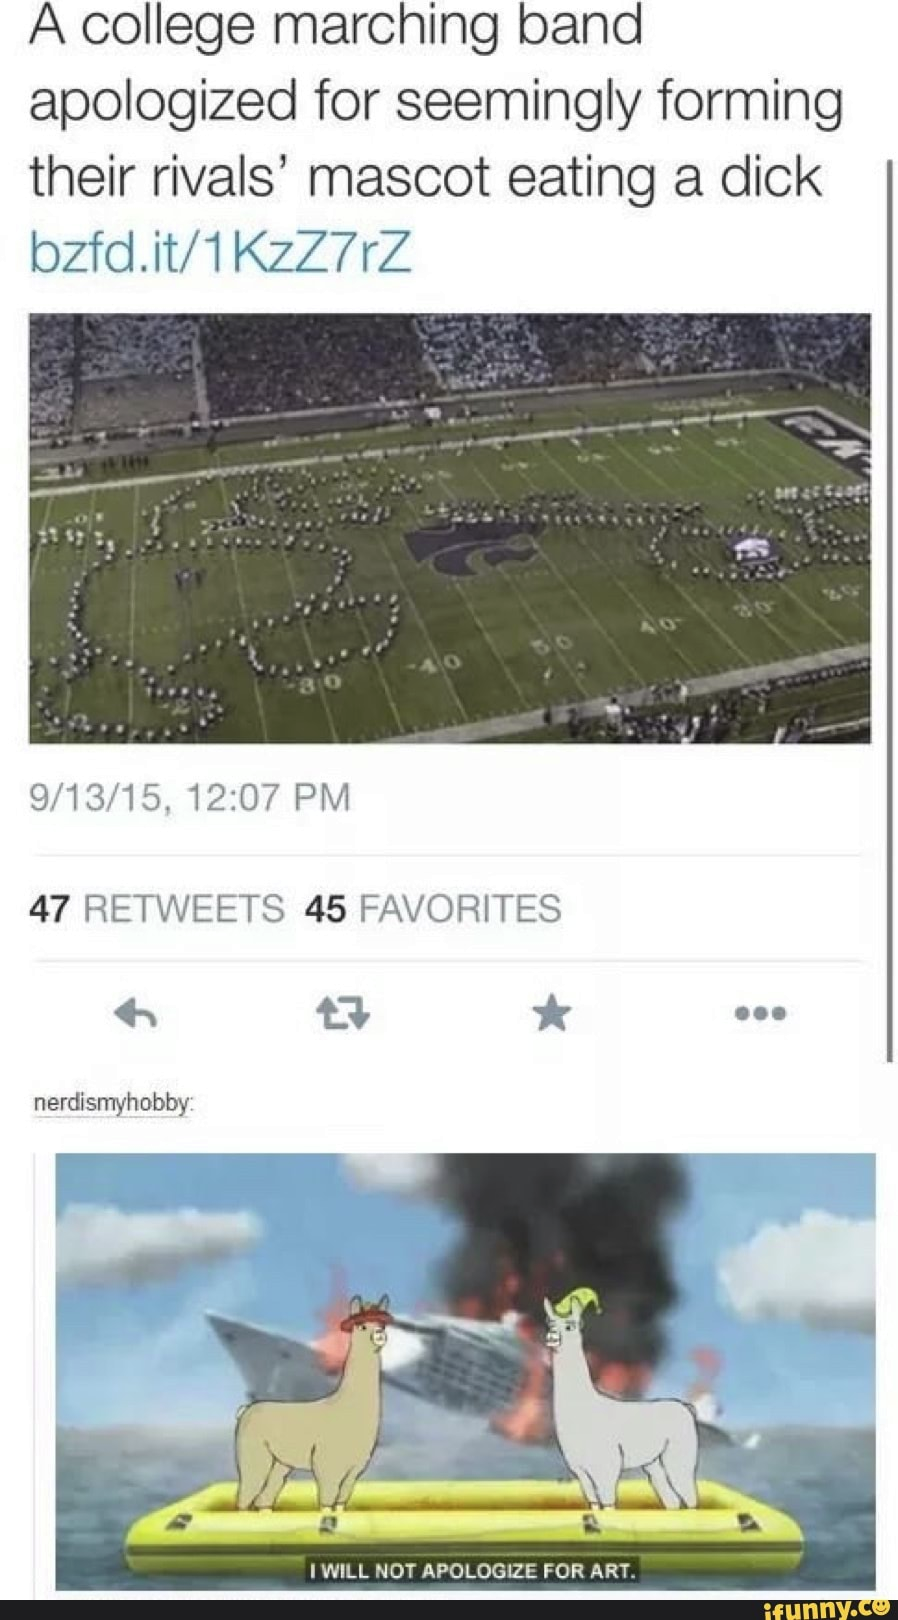 dirty-memes-will not apologize for art - A college marching band apologized for seemingly forming their rivals' mascot eating a dick bzfd.it1Kzz7rz Al 91315, 47 45 Favorites nerismeby 11 Twill Not Apologre For Art sunny